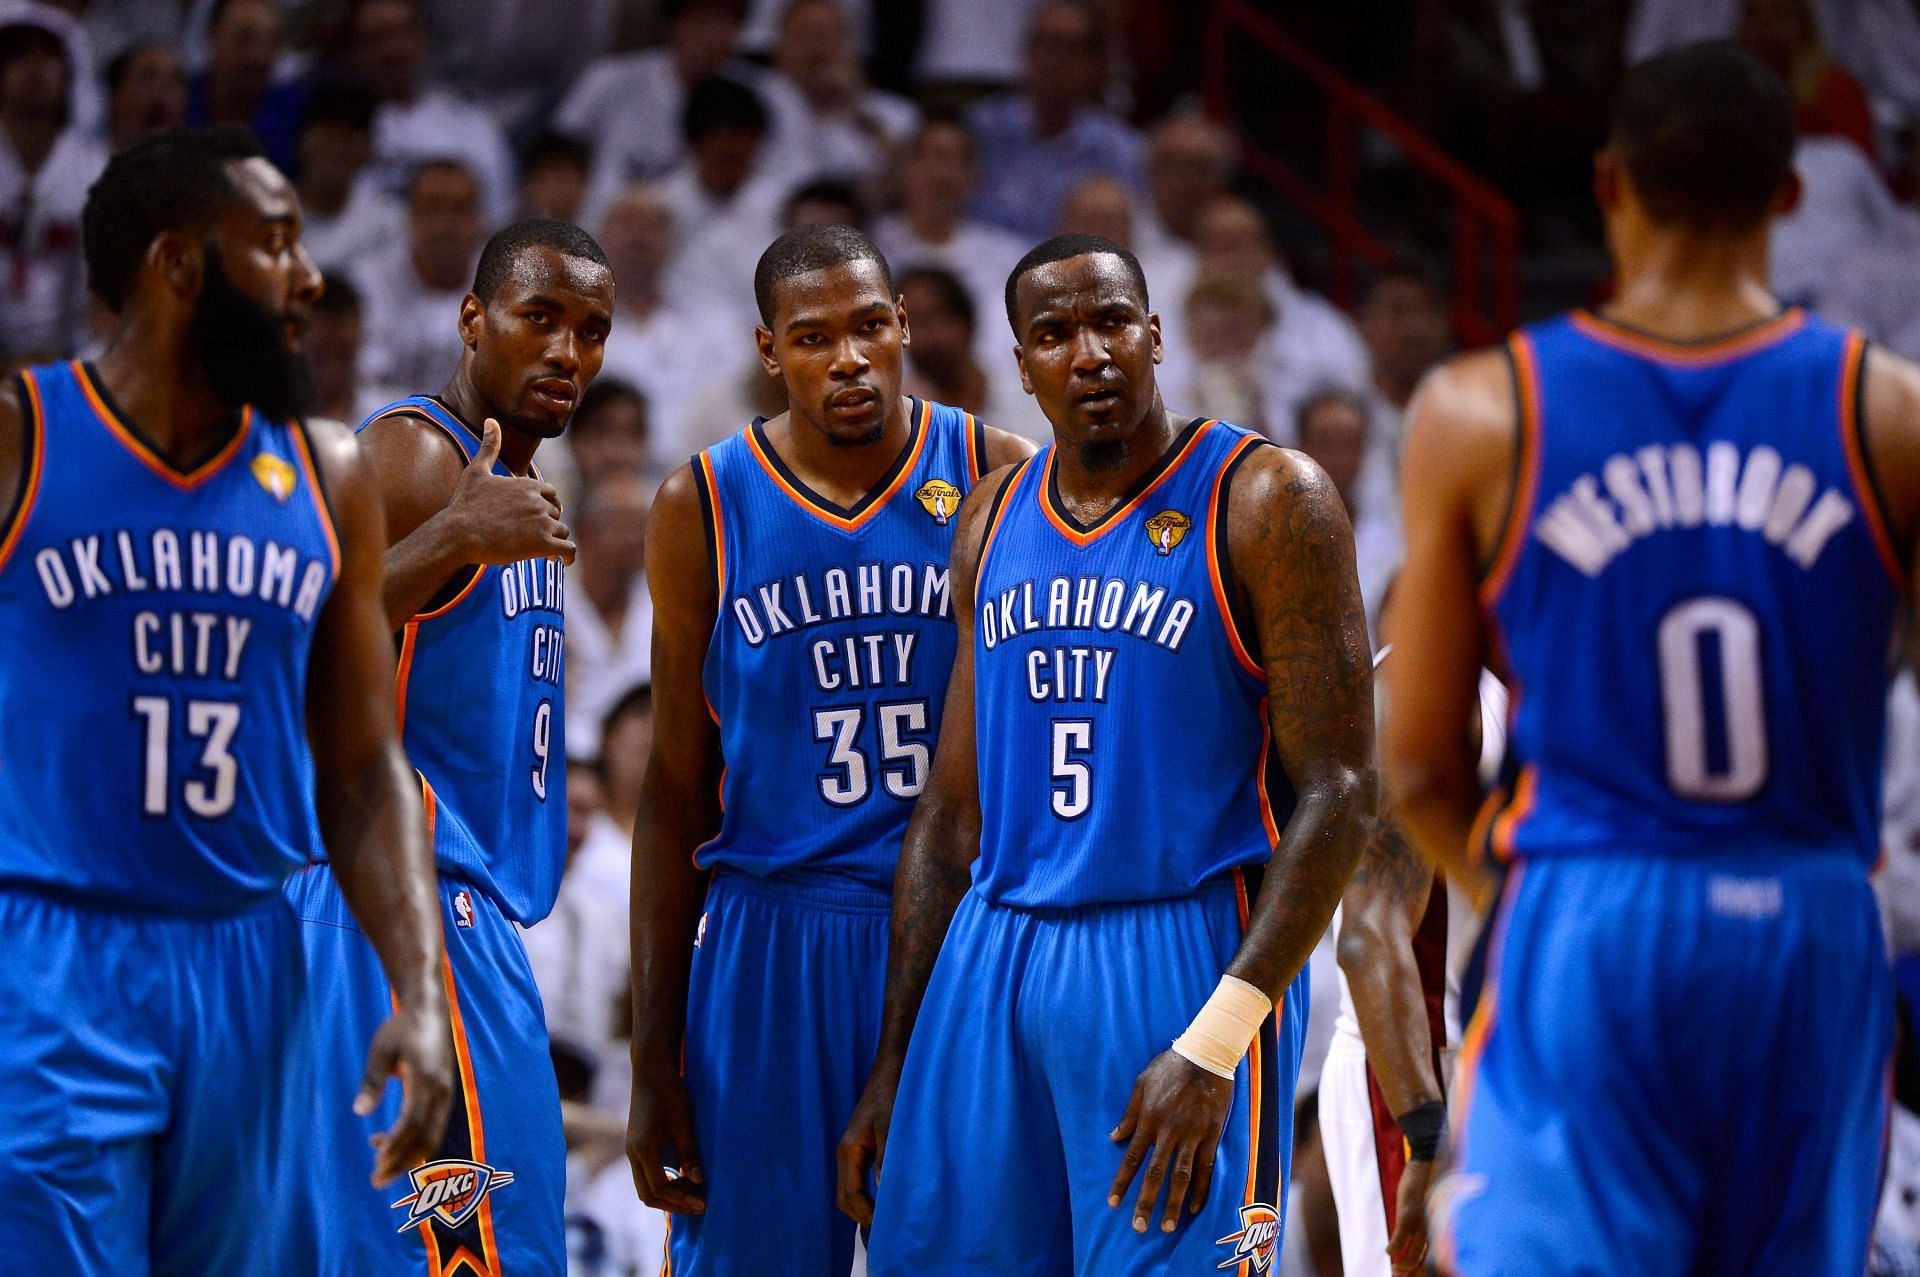 (L-R) James Harden, Serge Ibaka, Kevin Durant, Kendrick Perkins and Russell Westbrook of the Oklahoma City Thunder.